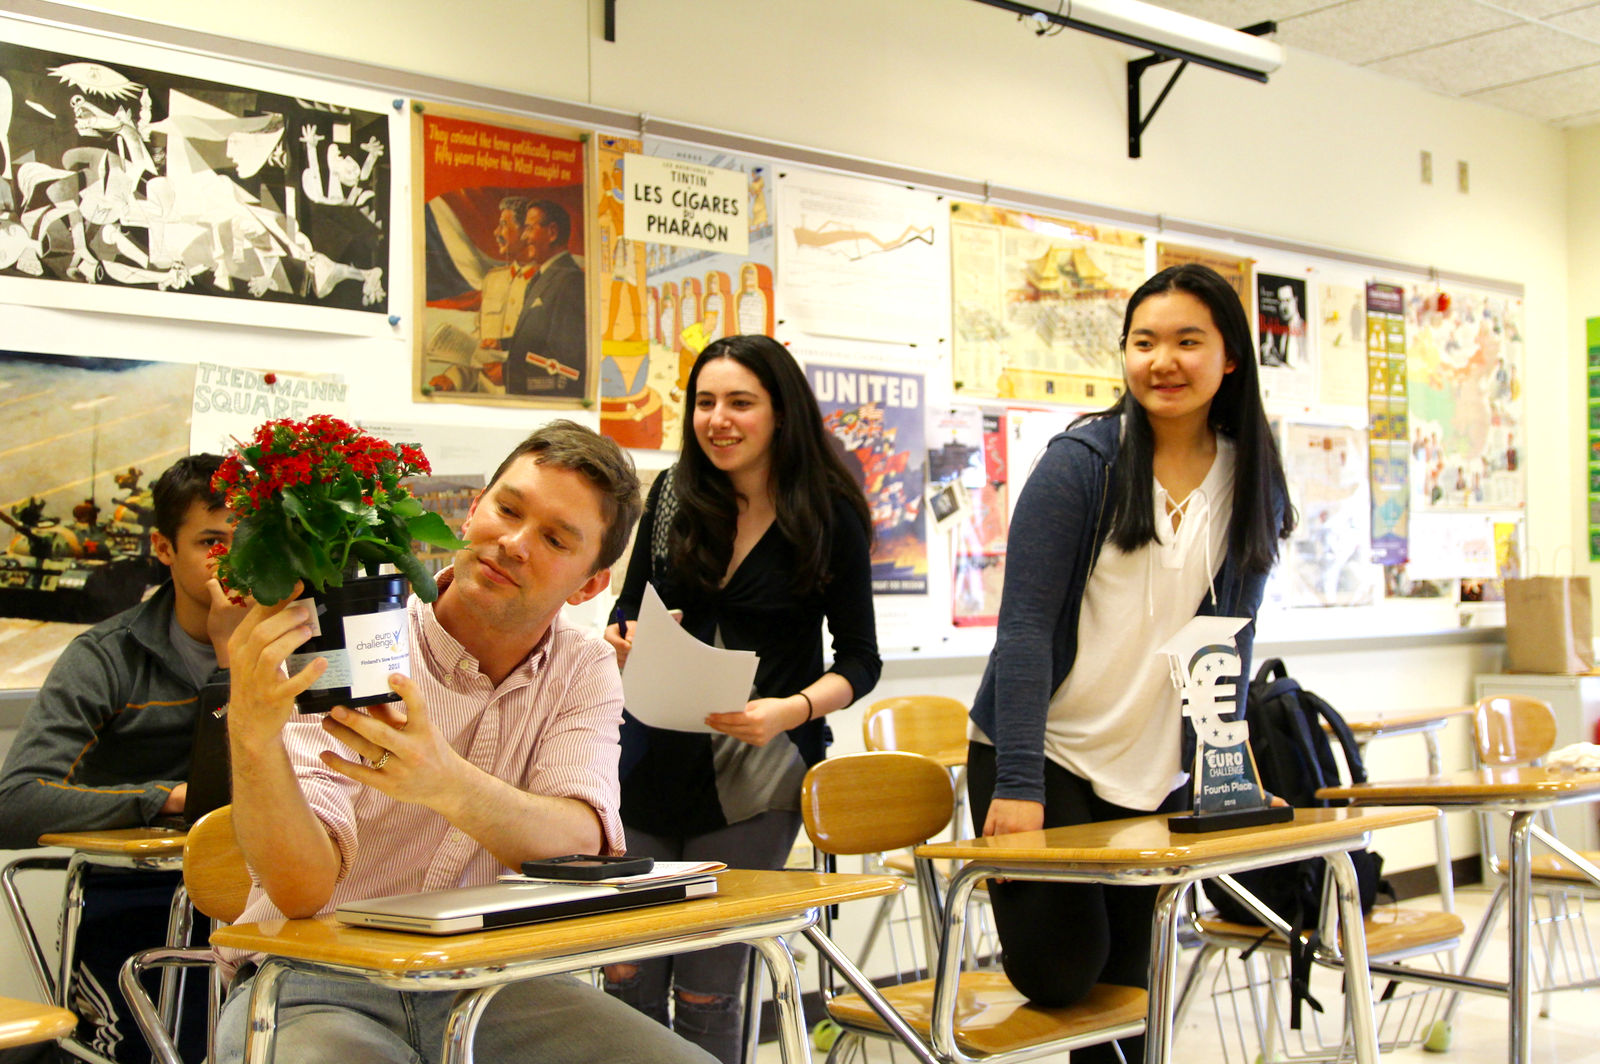 Julia Blank and Melissa Woo look on as Mr. Tiedeman reads the personal notes from this students attached to a plant they gave him. May 1, 2018 Photo: Leslie Yager